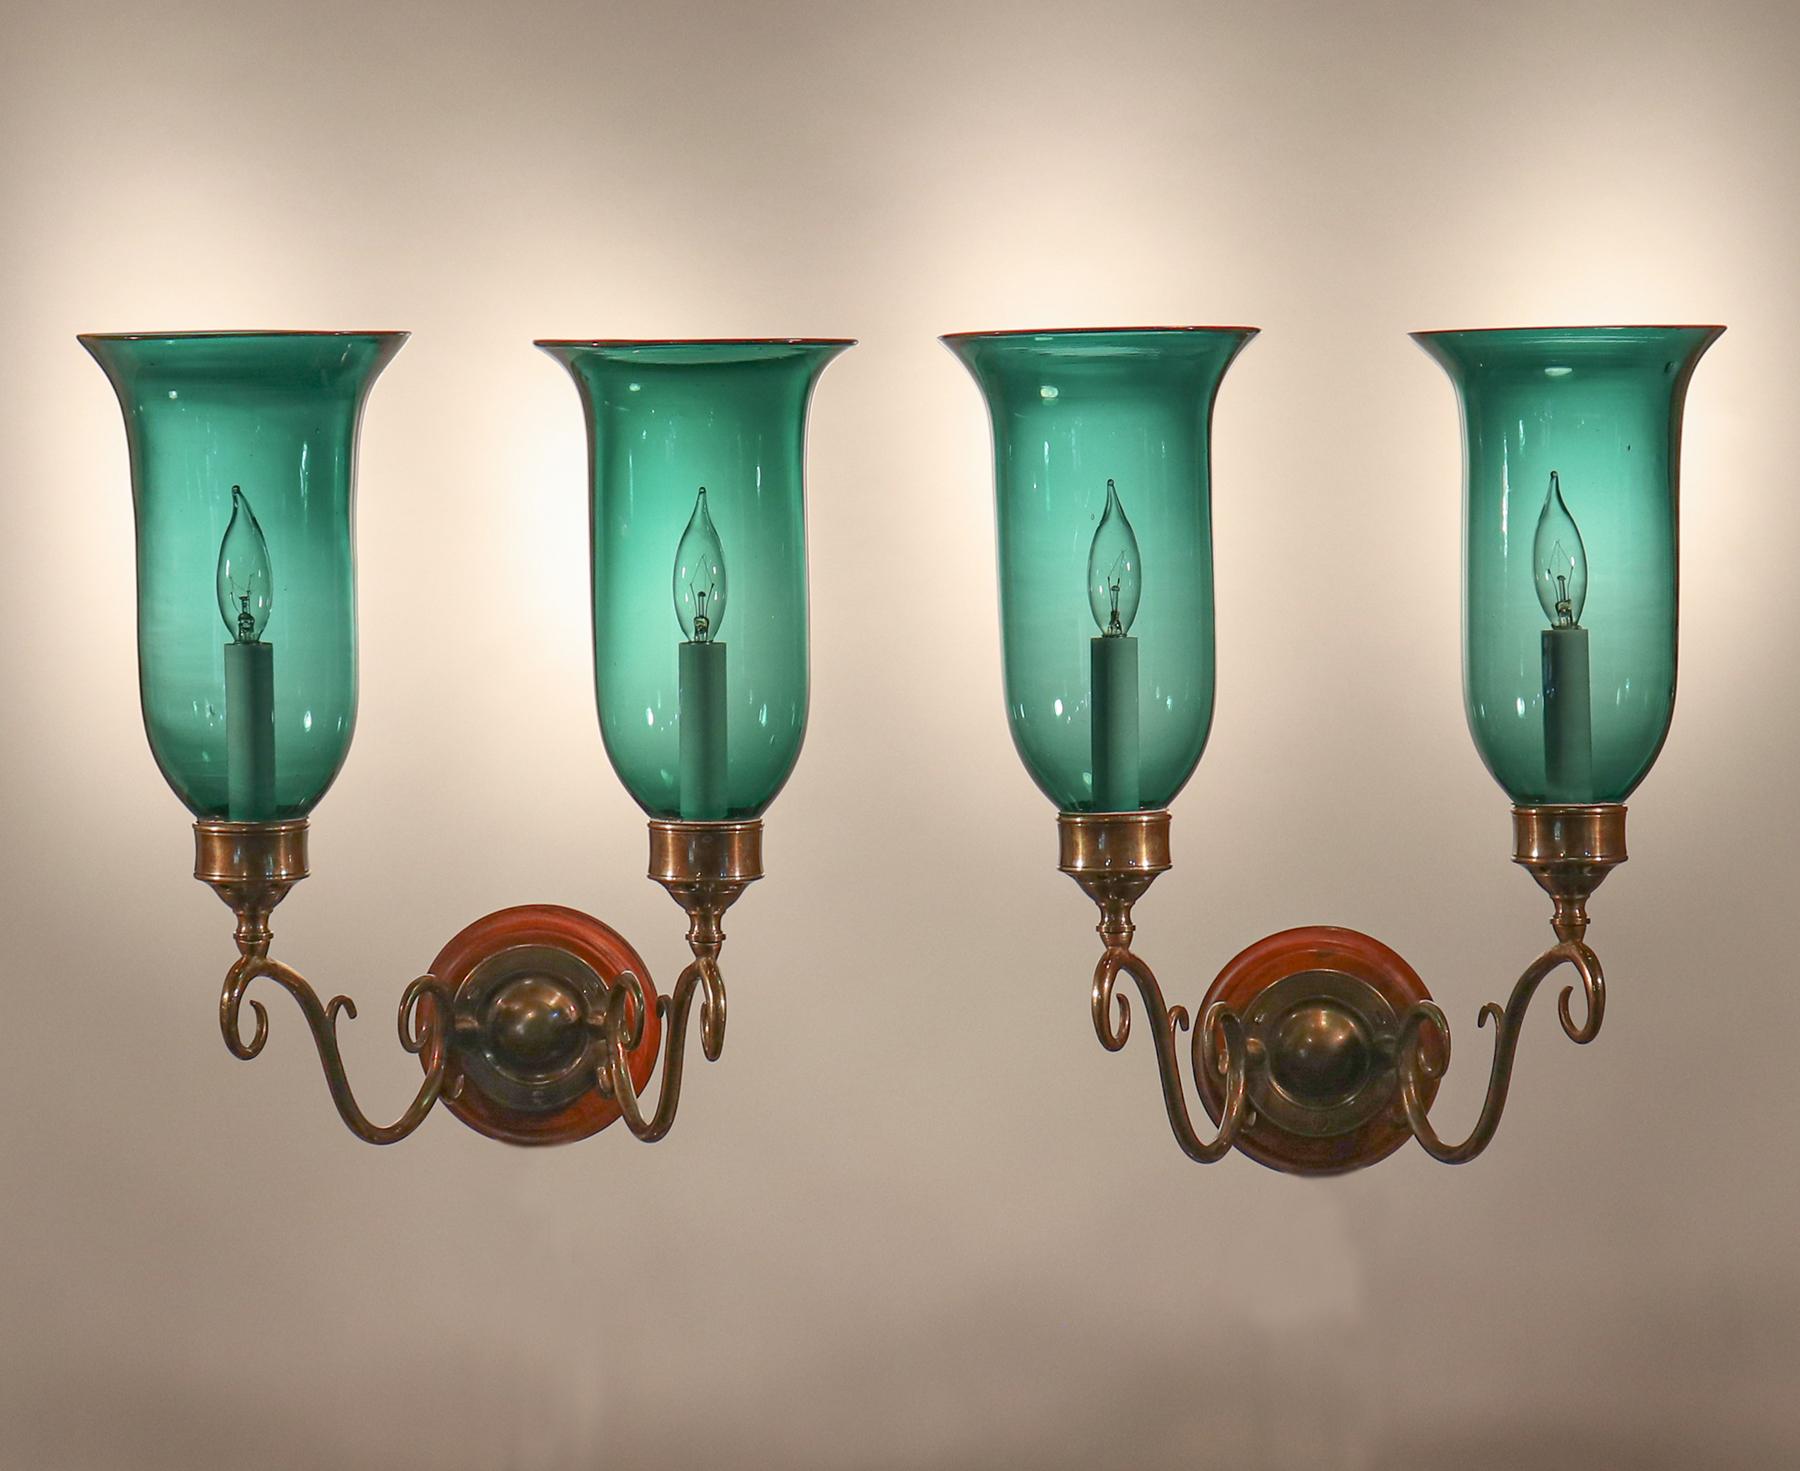 A set of four well-matched, gracefully flared hurricane shades from England, circa 1900. These subdued green shades are of very good quality, with desirable air bubbles and waviness in the hand blown glass. Originally for candles, the sconces have